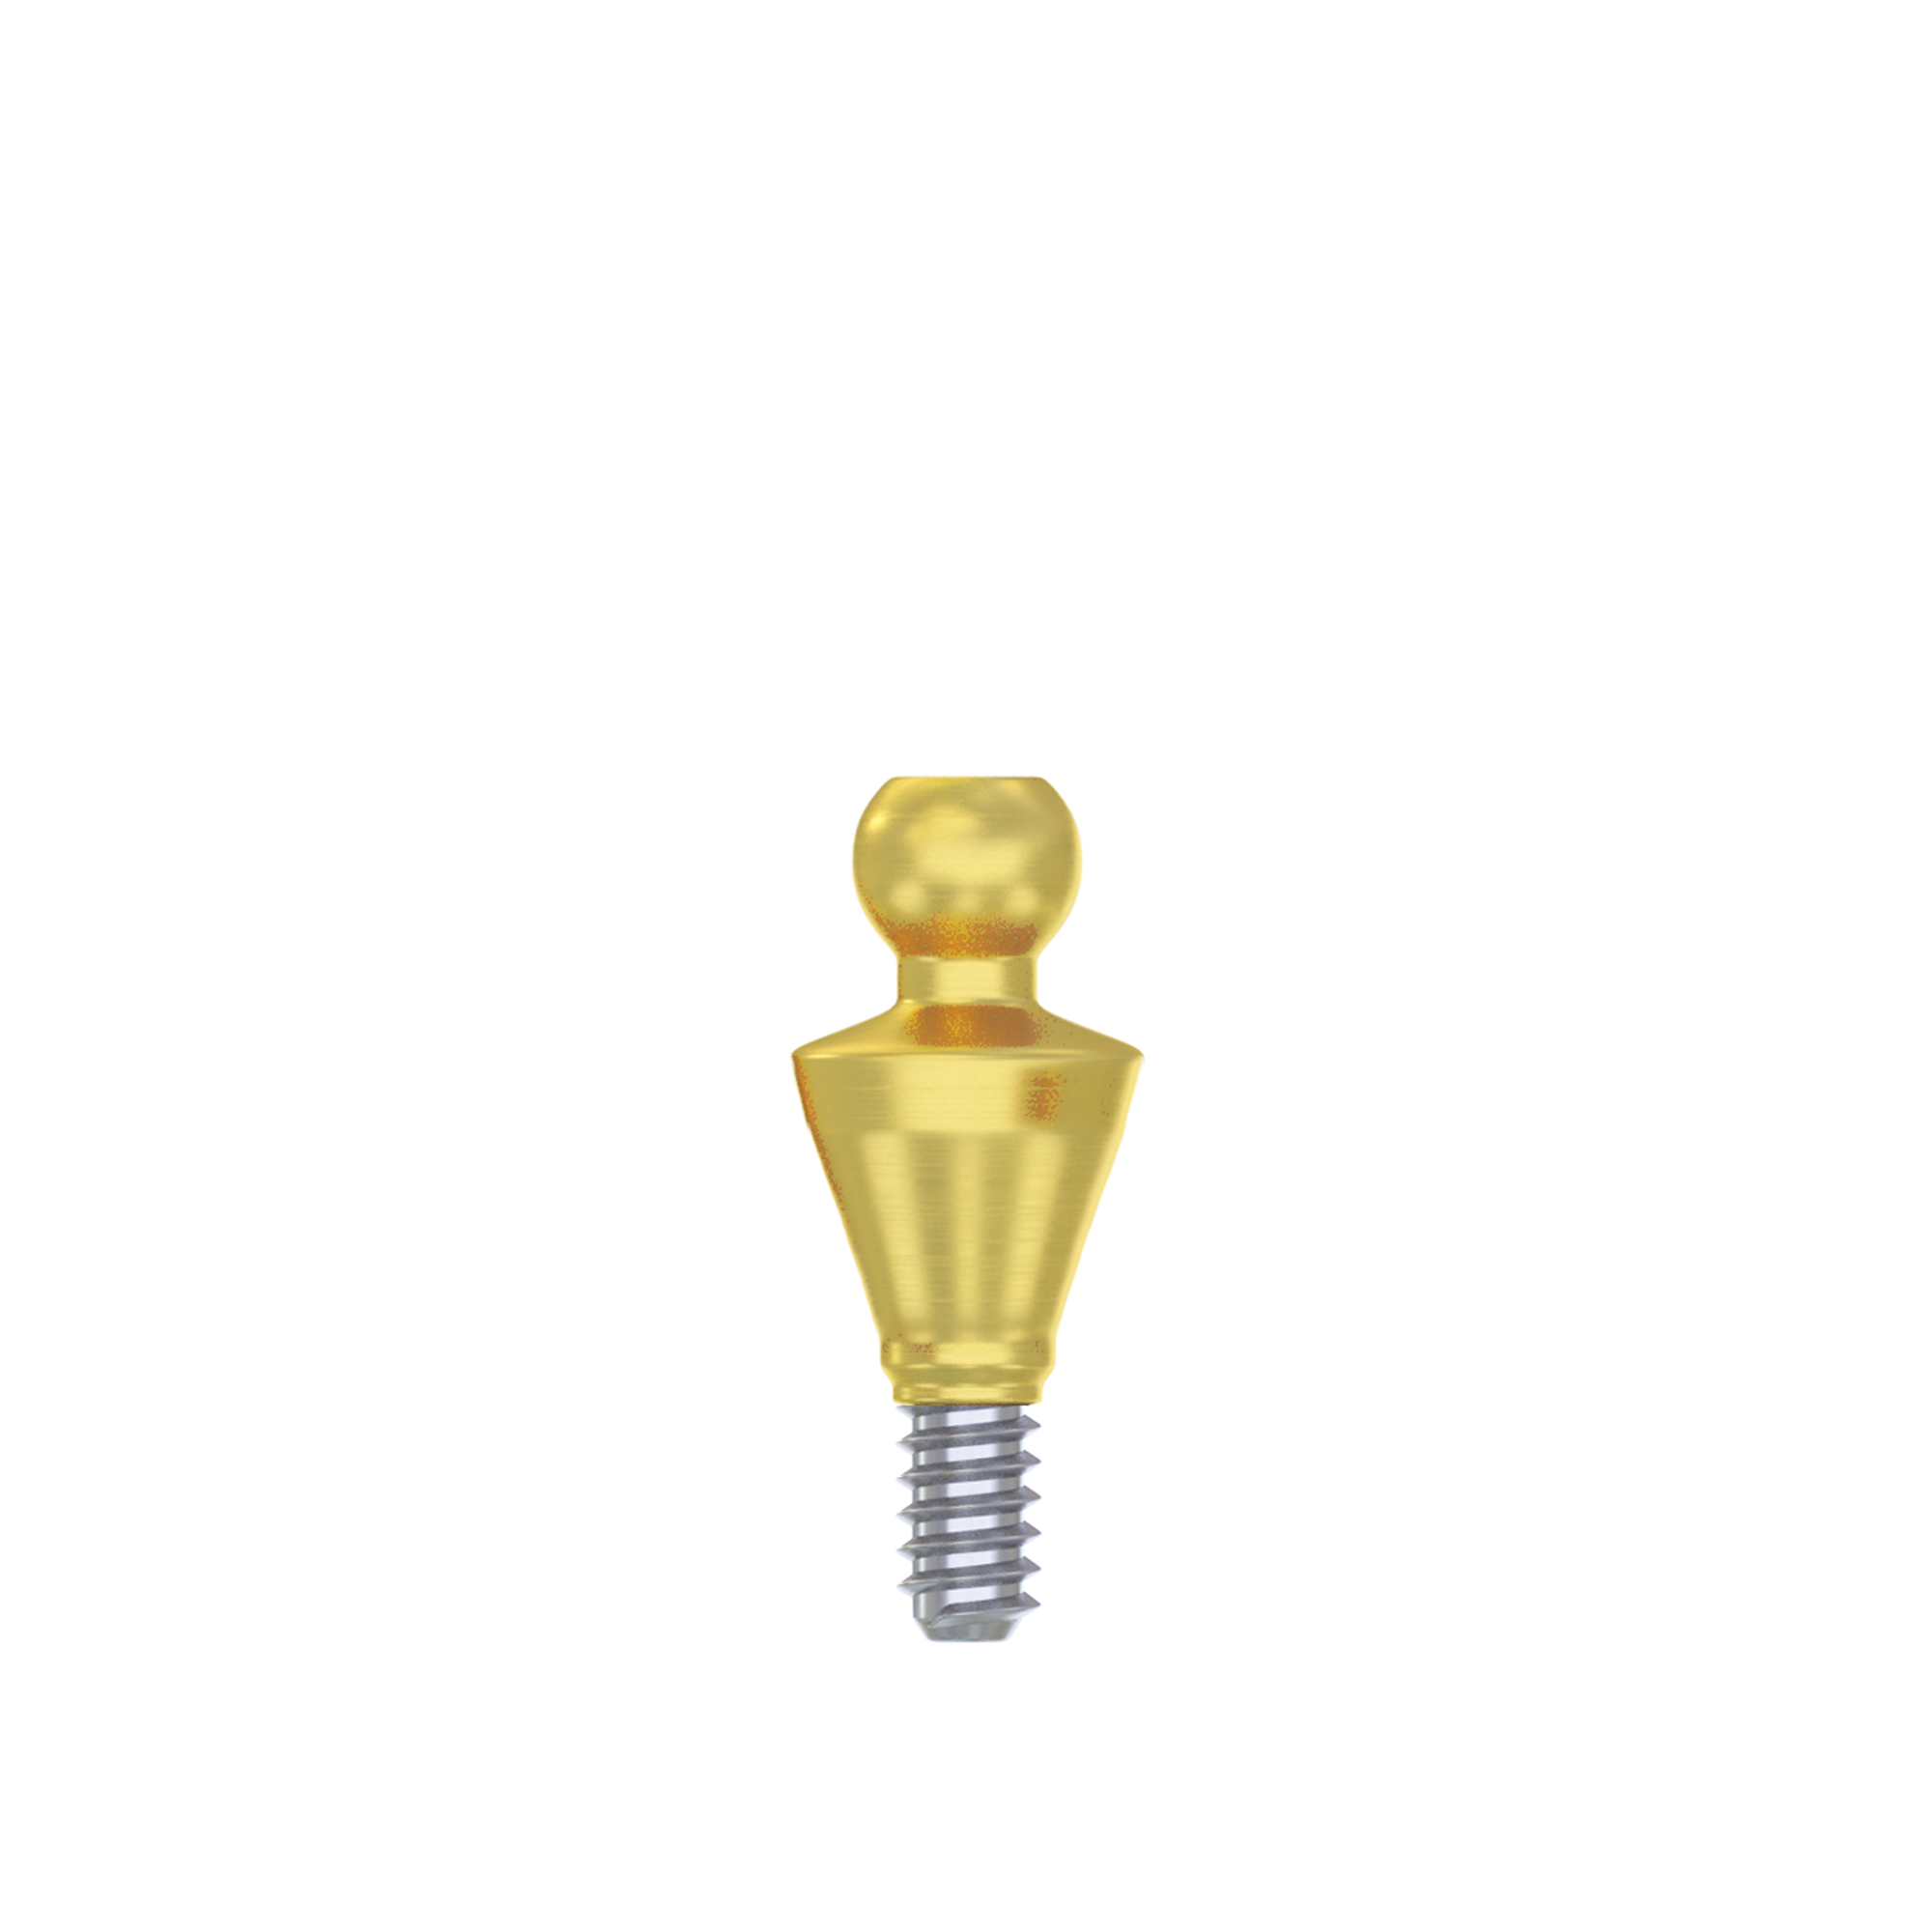 DSI Straight Ball Attachment 3.5mm  - Conical Connection NP Ø3.5mm